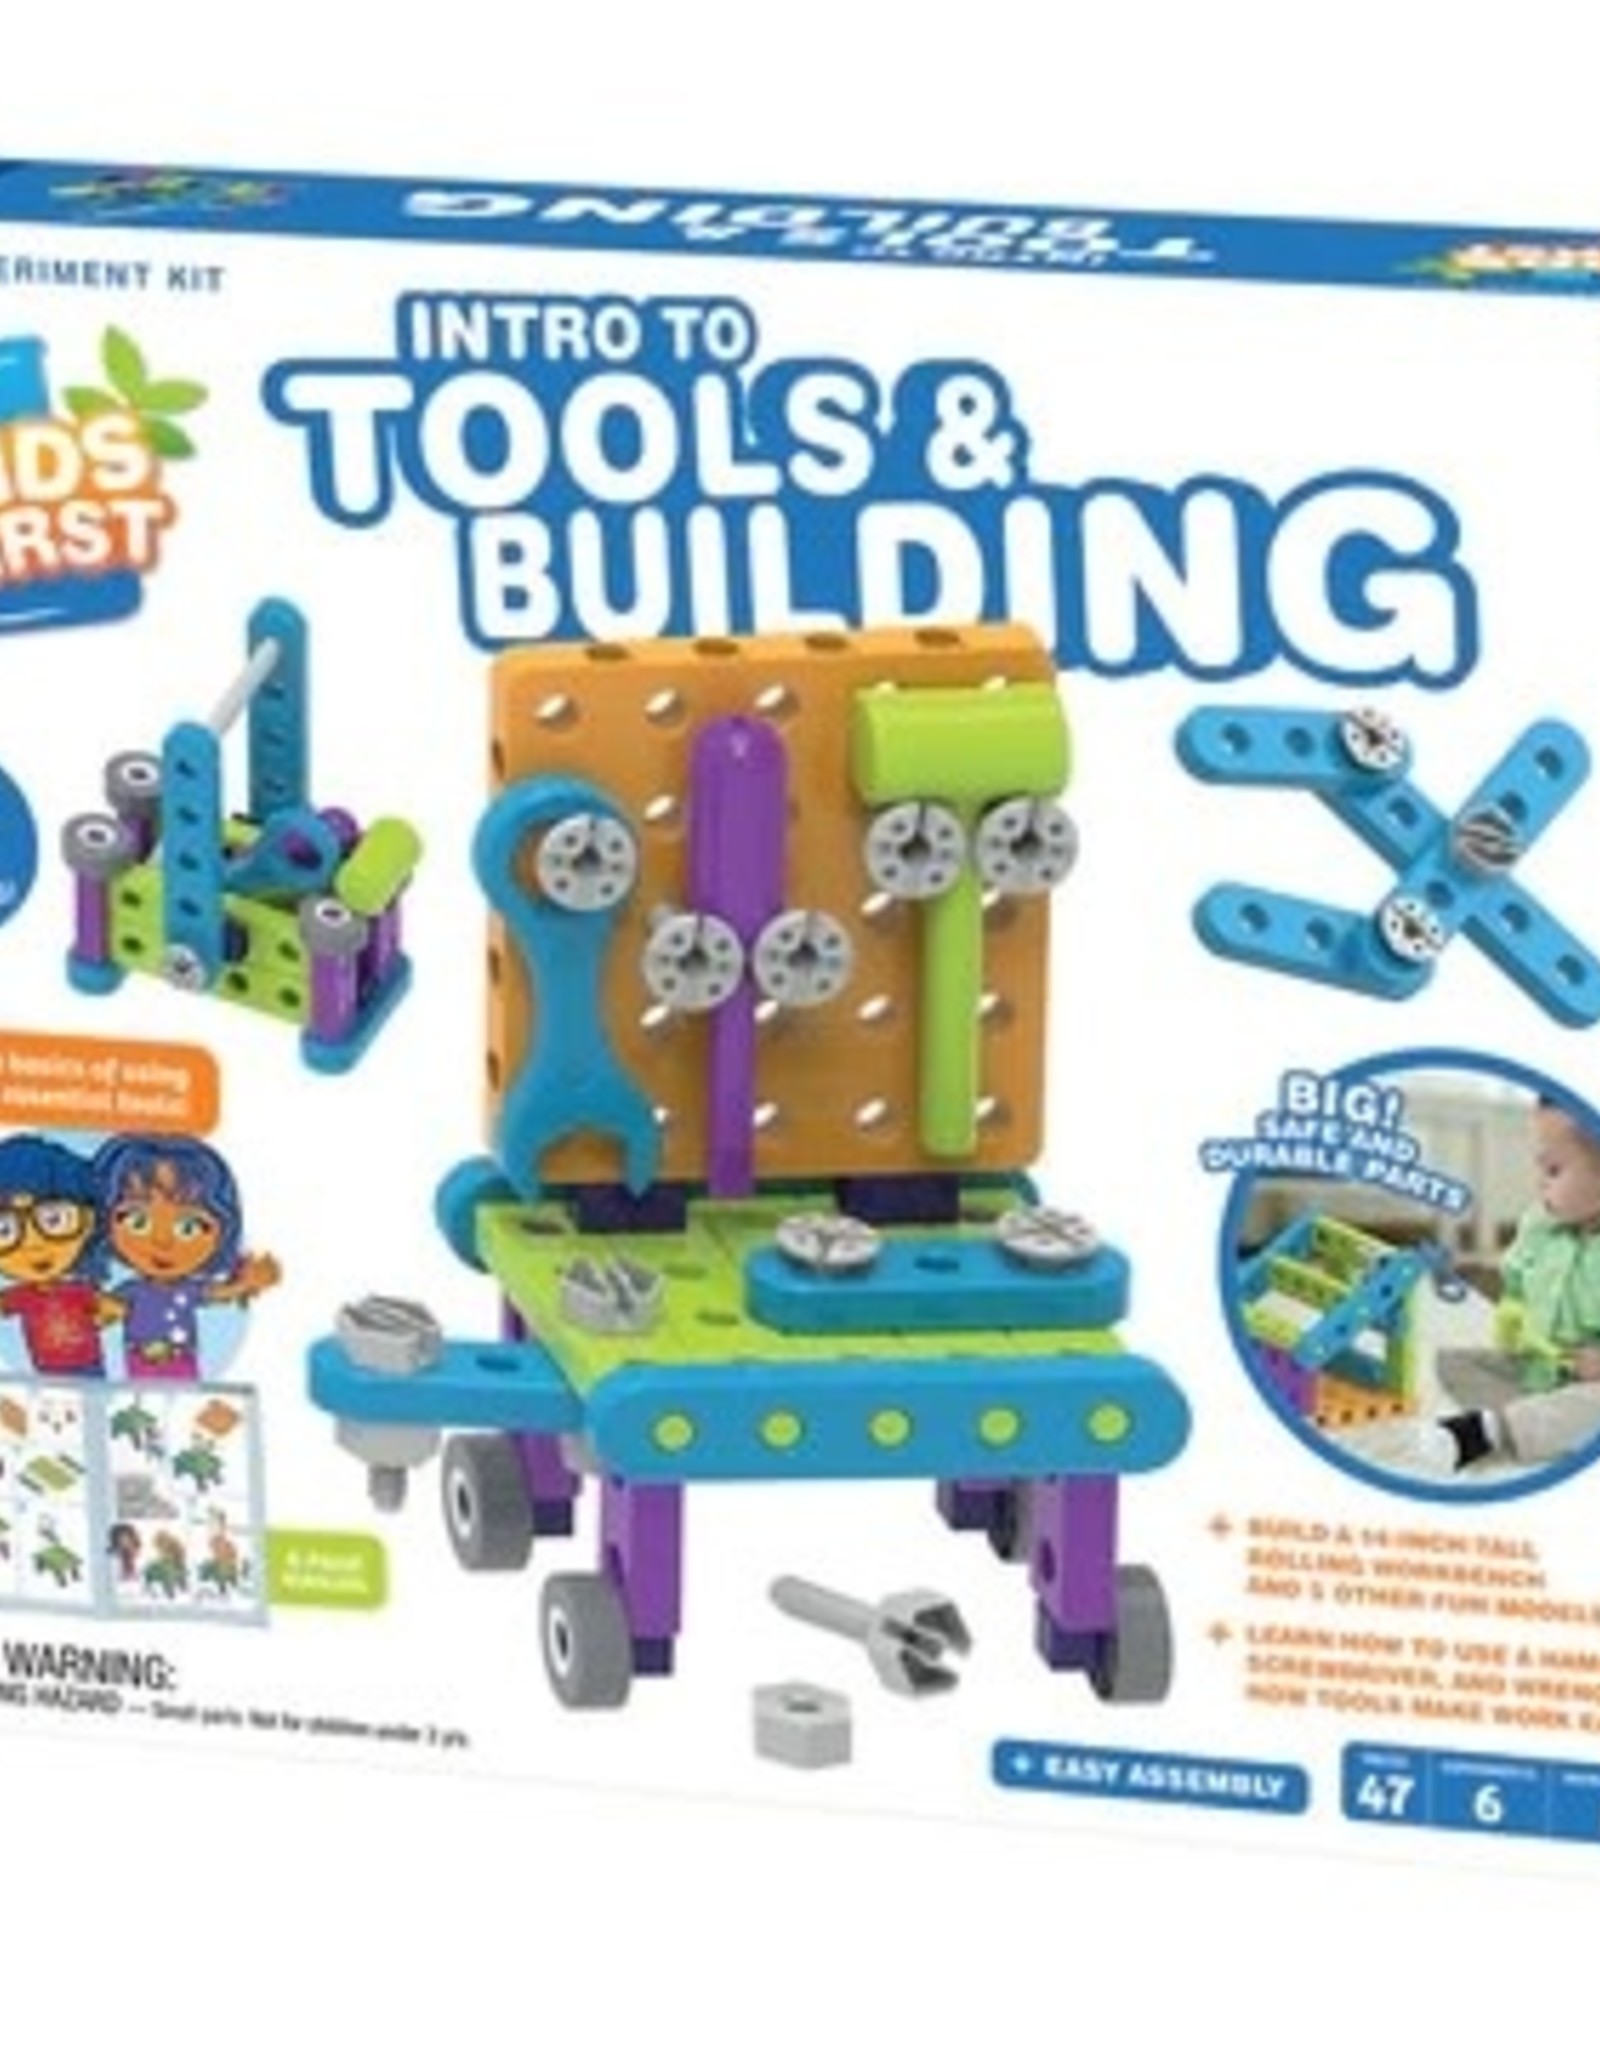 Thames & Kosmos KIDS FIRST - Intro to Tools & Building